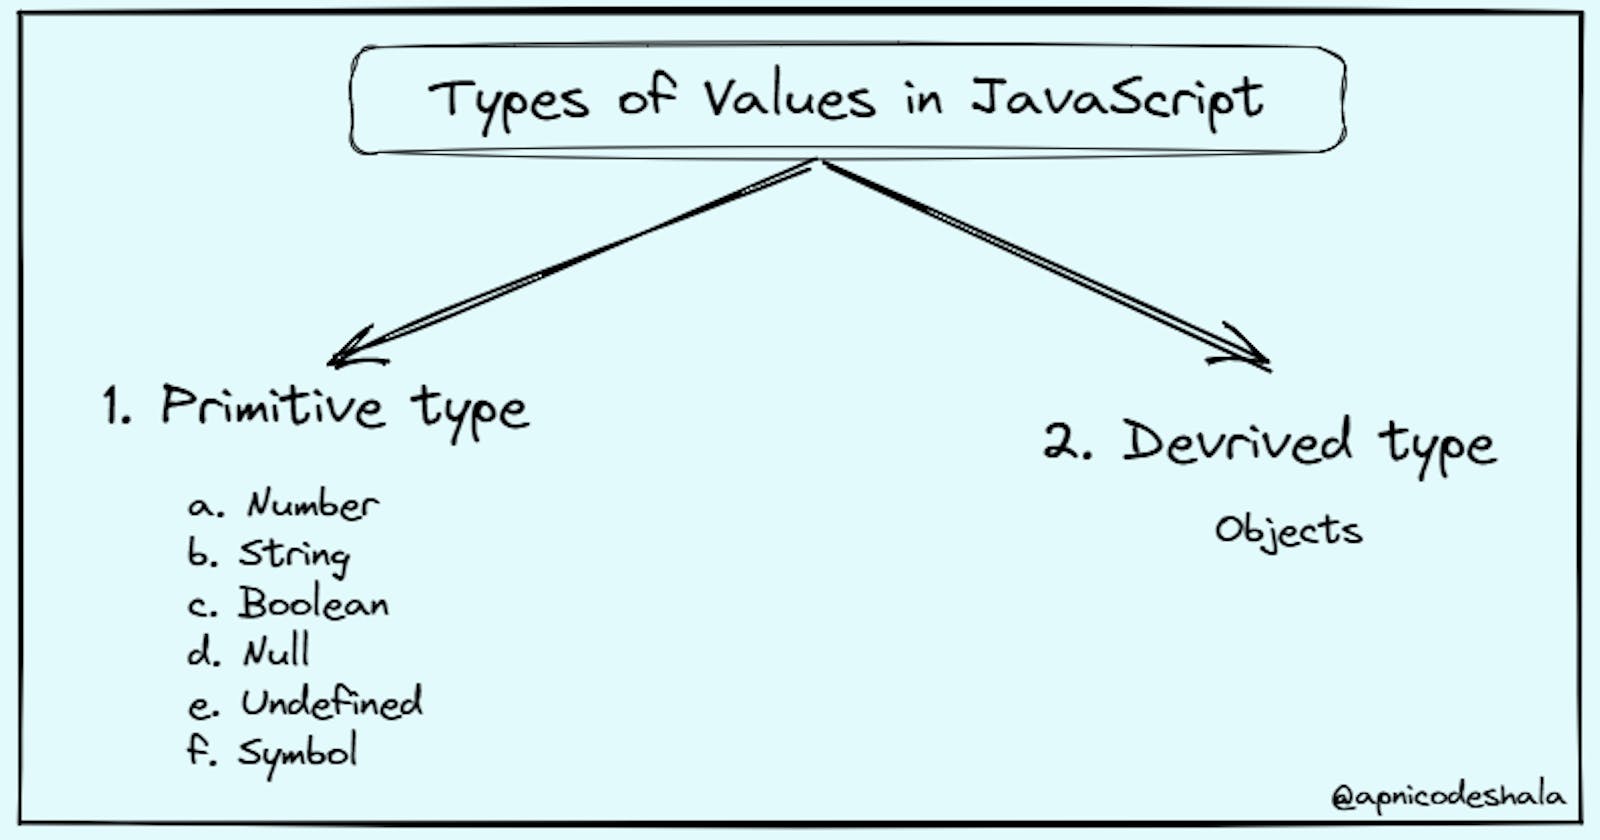 Understanding the Different Types of Values in JavaScript